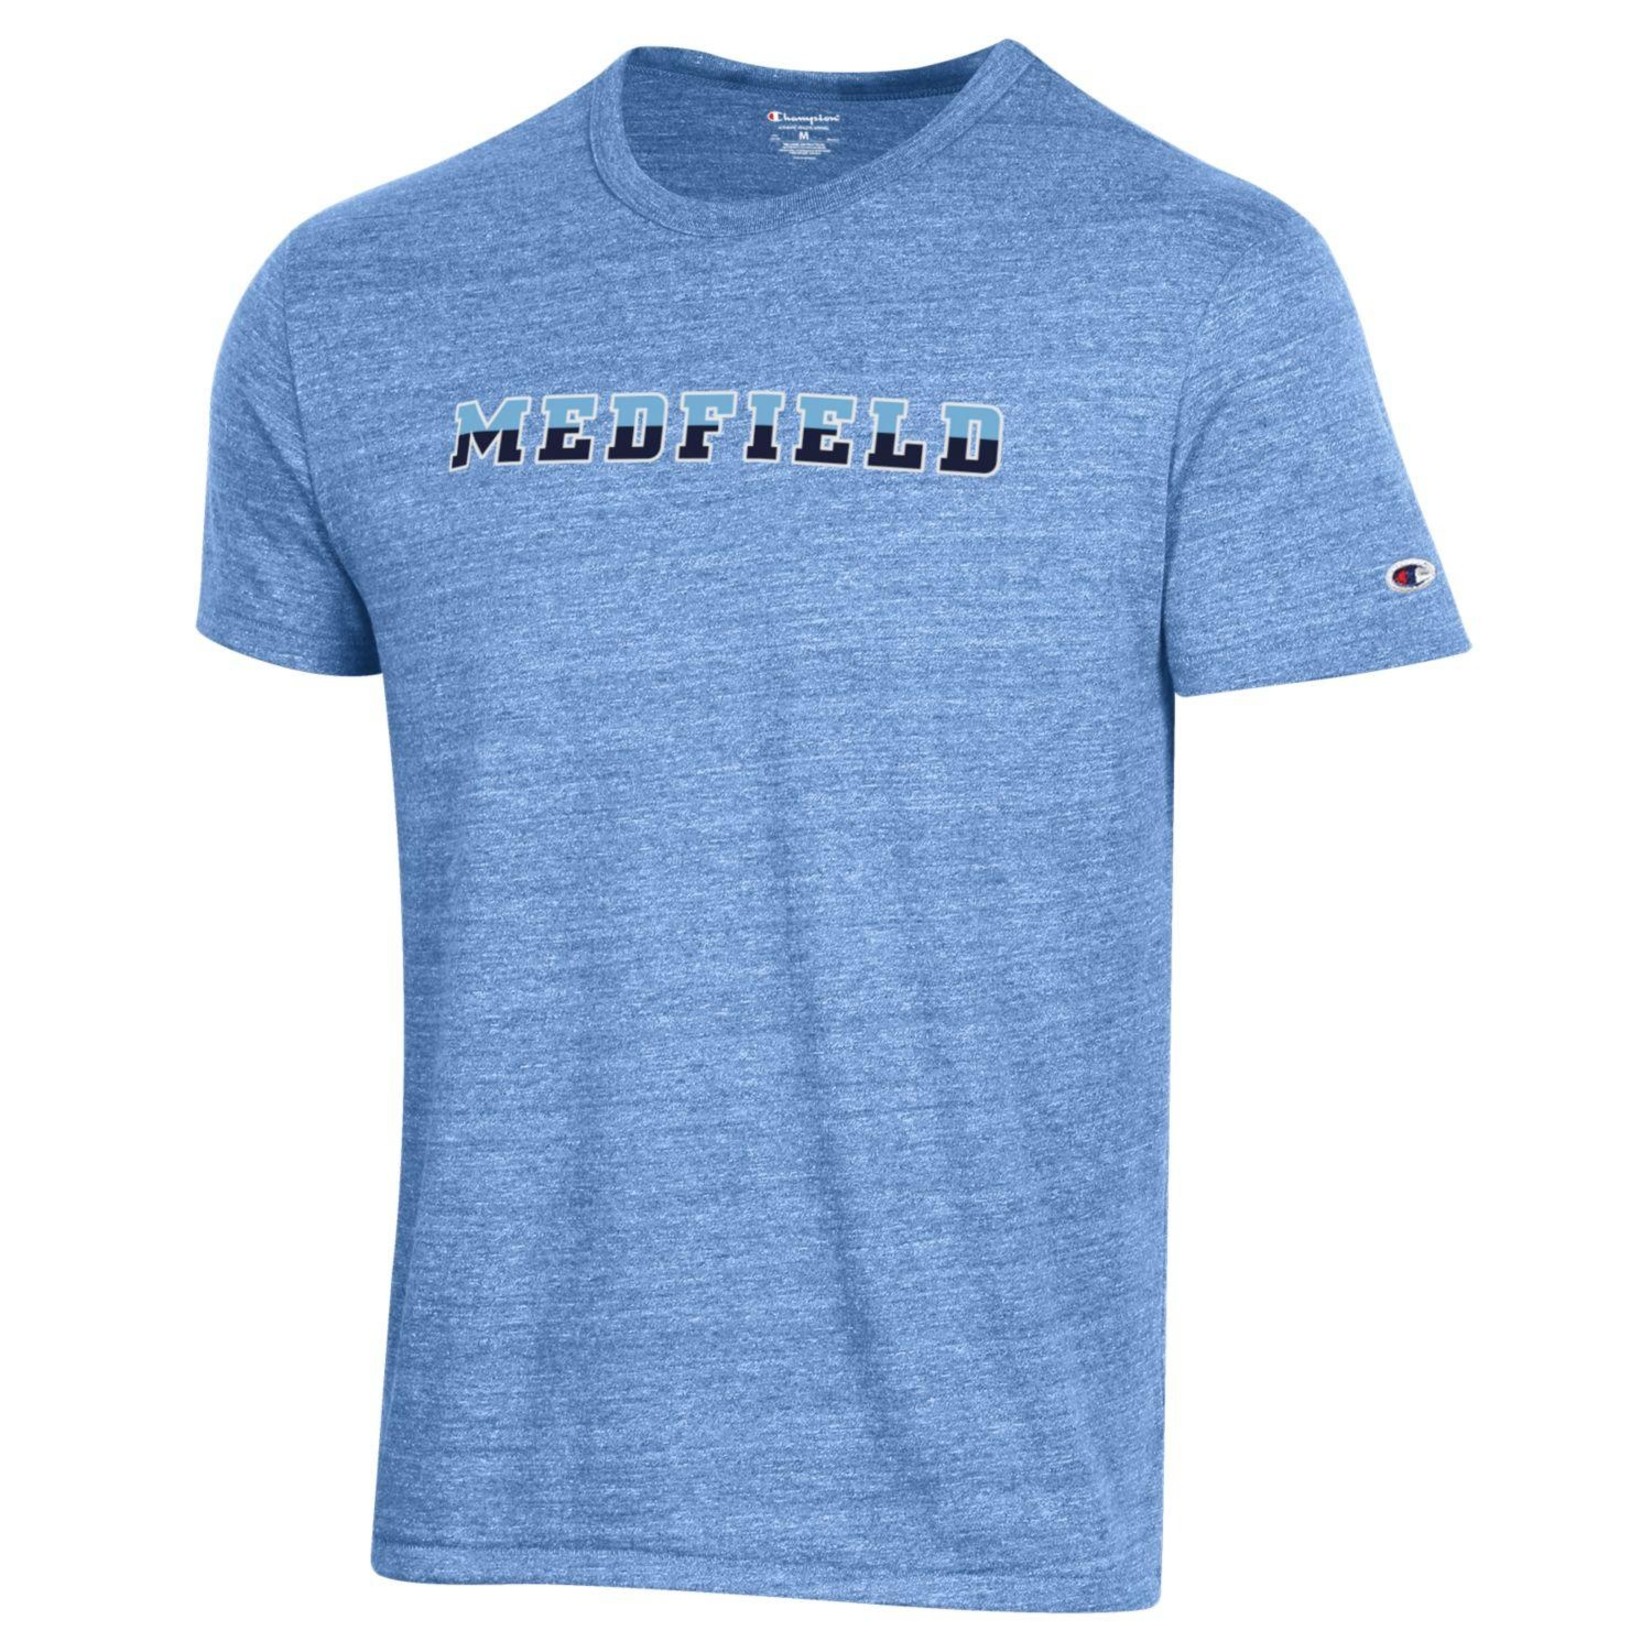 Champion - Adult Medfield 3 Color Tri-blend Tee -